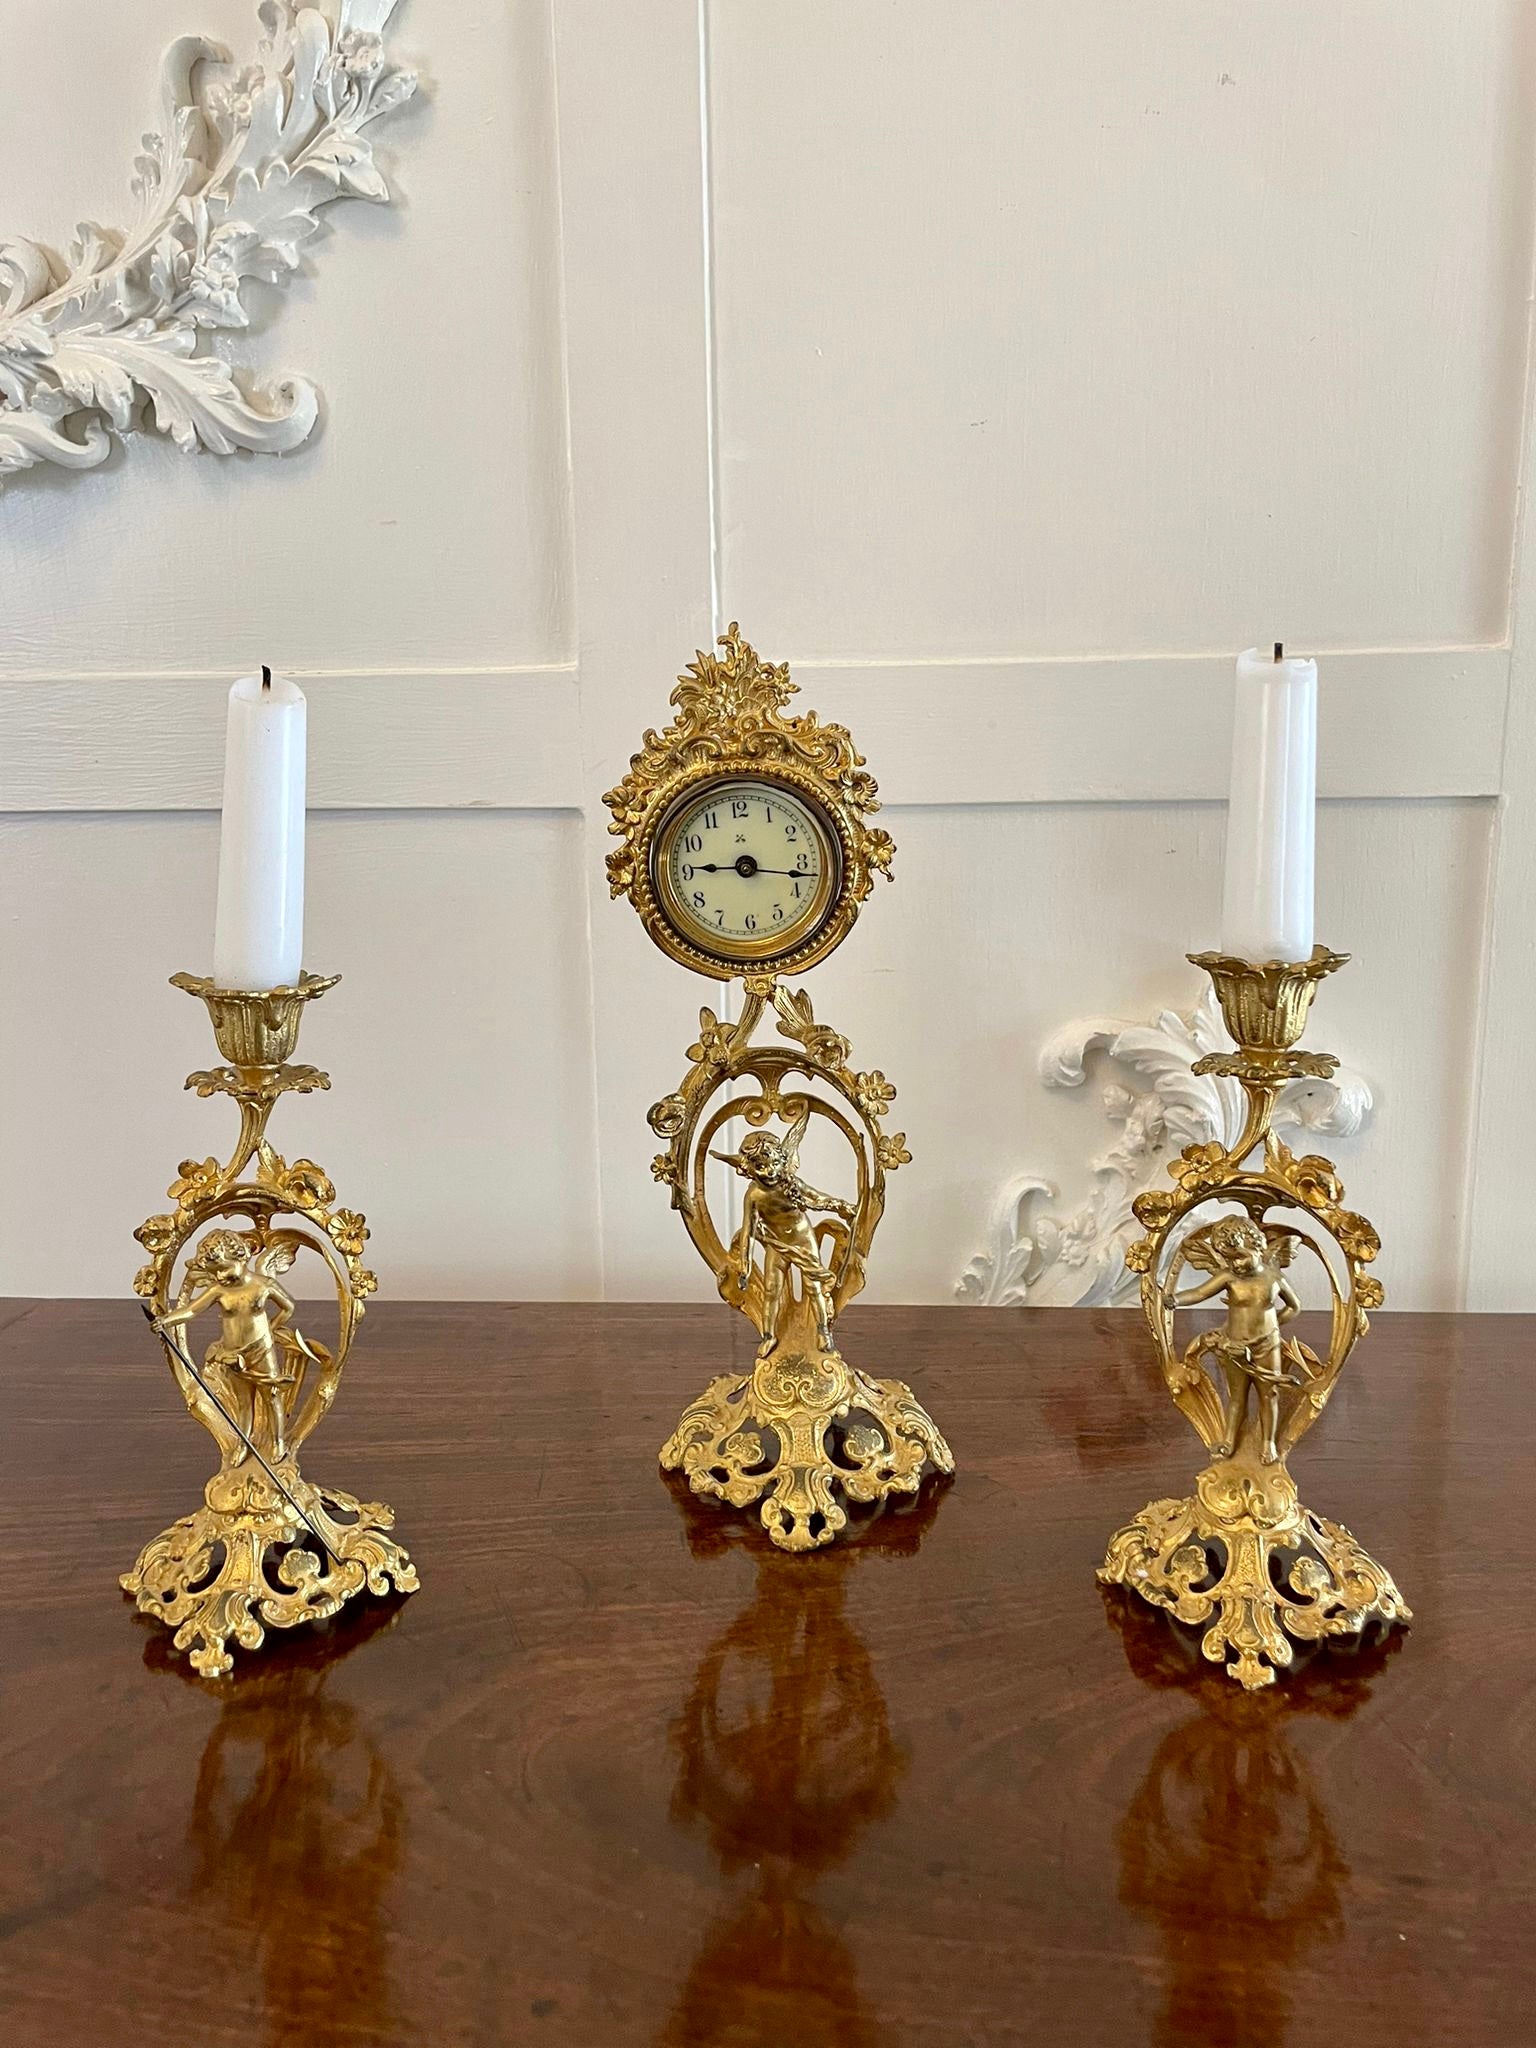 Fine antique Victorian French ornate gilded clock with delightful ornate cupids and flowers. The clock is an 8 day movement with original hands and a cupid to the base.

A delightful piece in good working order

Dimensions:
H 27 x W 9.5 x D